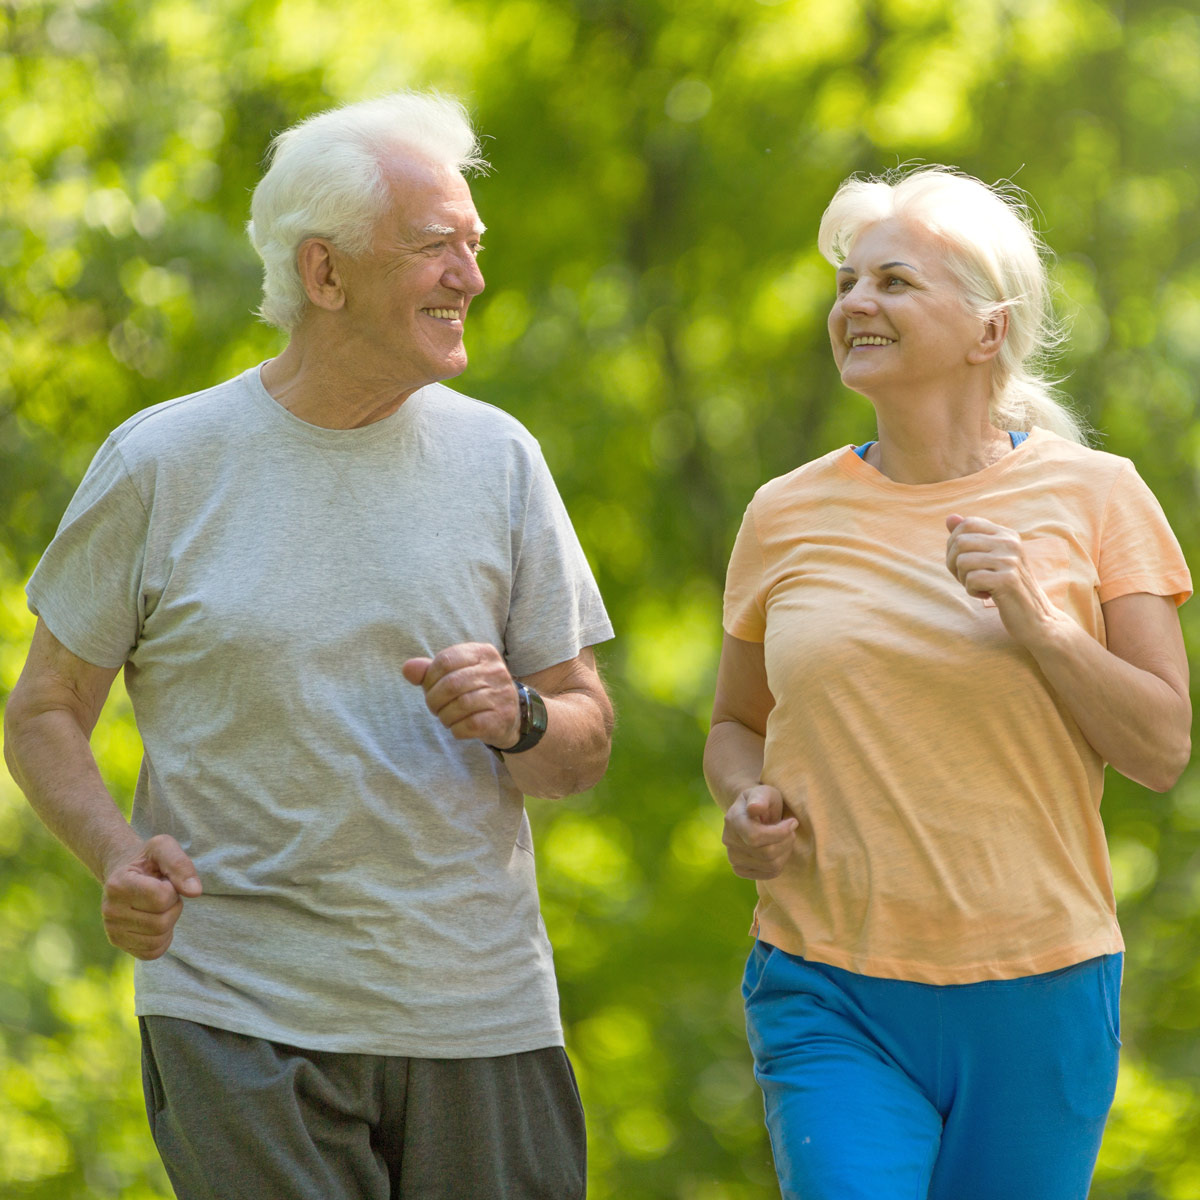 Retiree couple taking an outdoor jog together